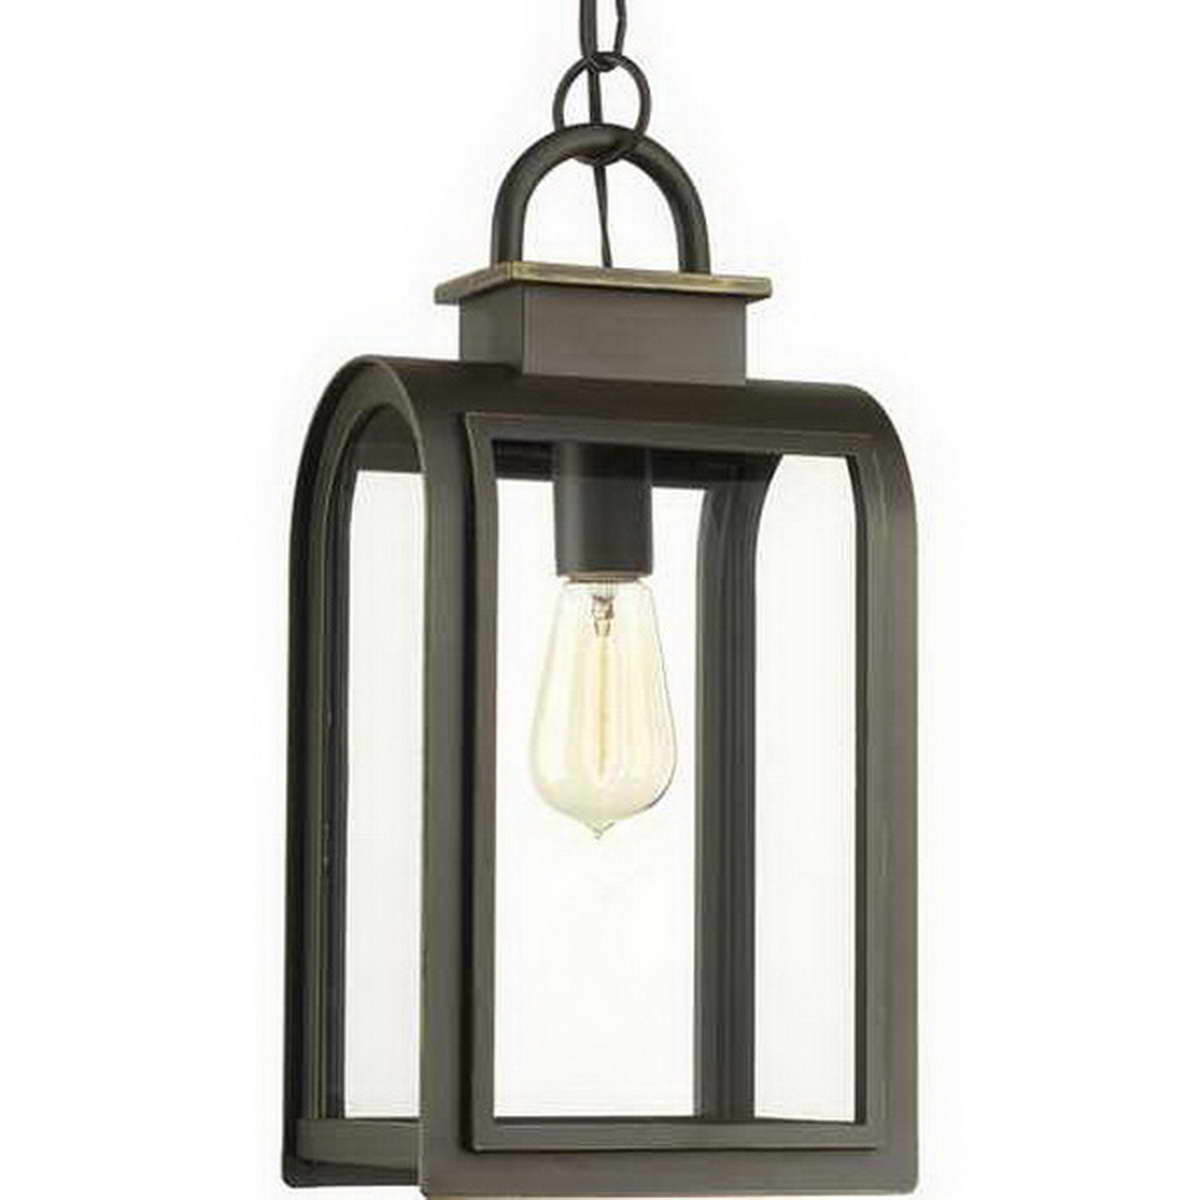 Refuge 16 in. Outdoor Hanging Lanterns Oil Rubbed Bronze Finish